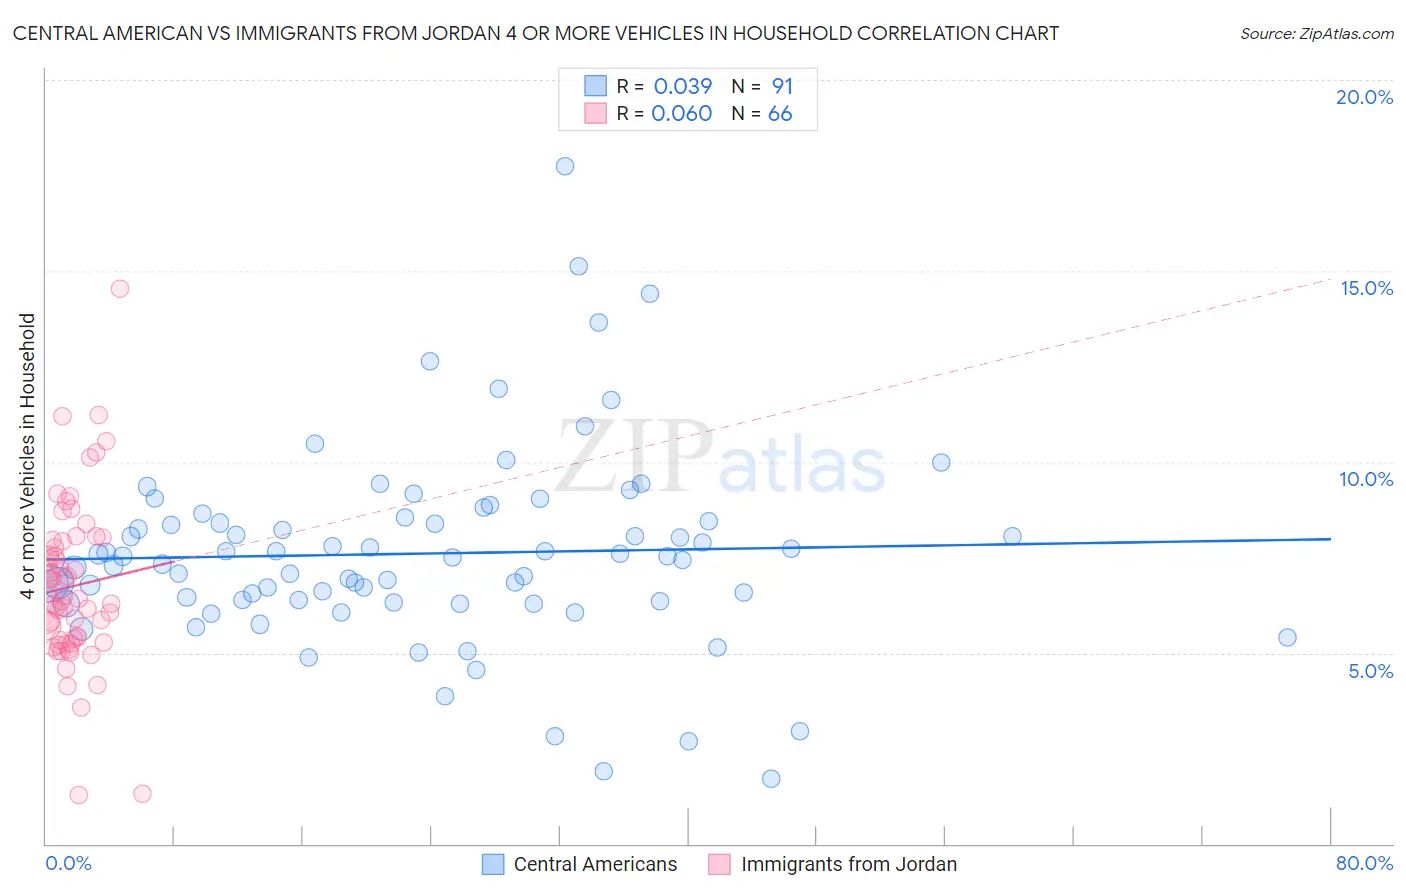 Central American vs Immigrants from Jordan 4 or more Vehicles in Household